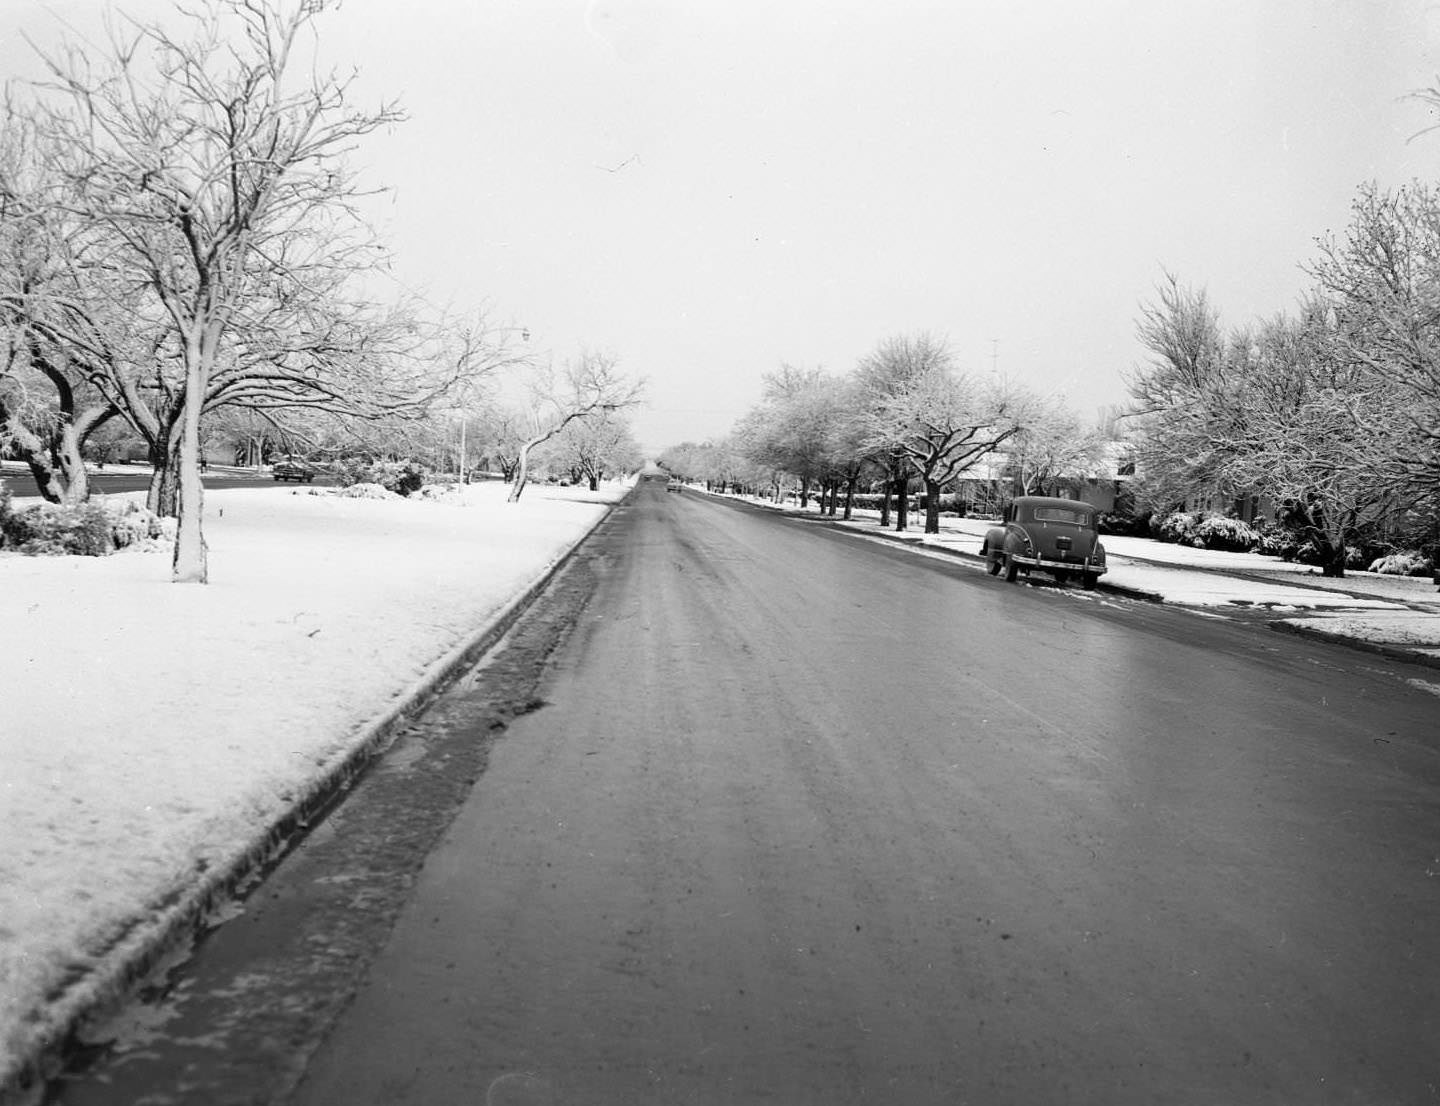 A street scene with the sidewalks and vegetation all covered in snow, 1959